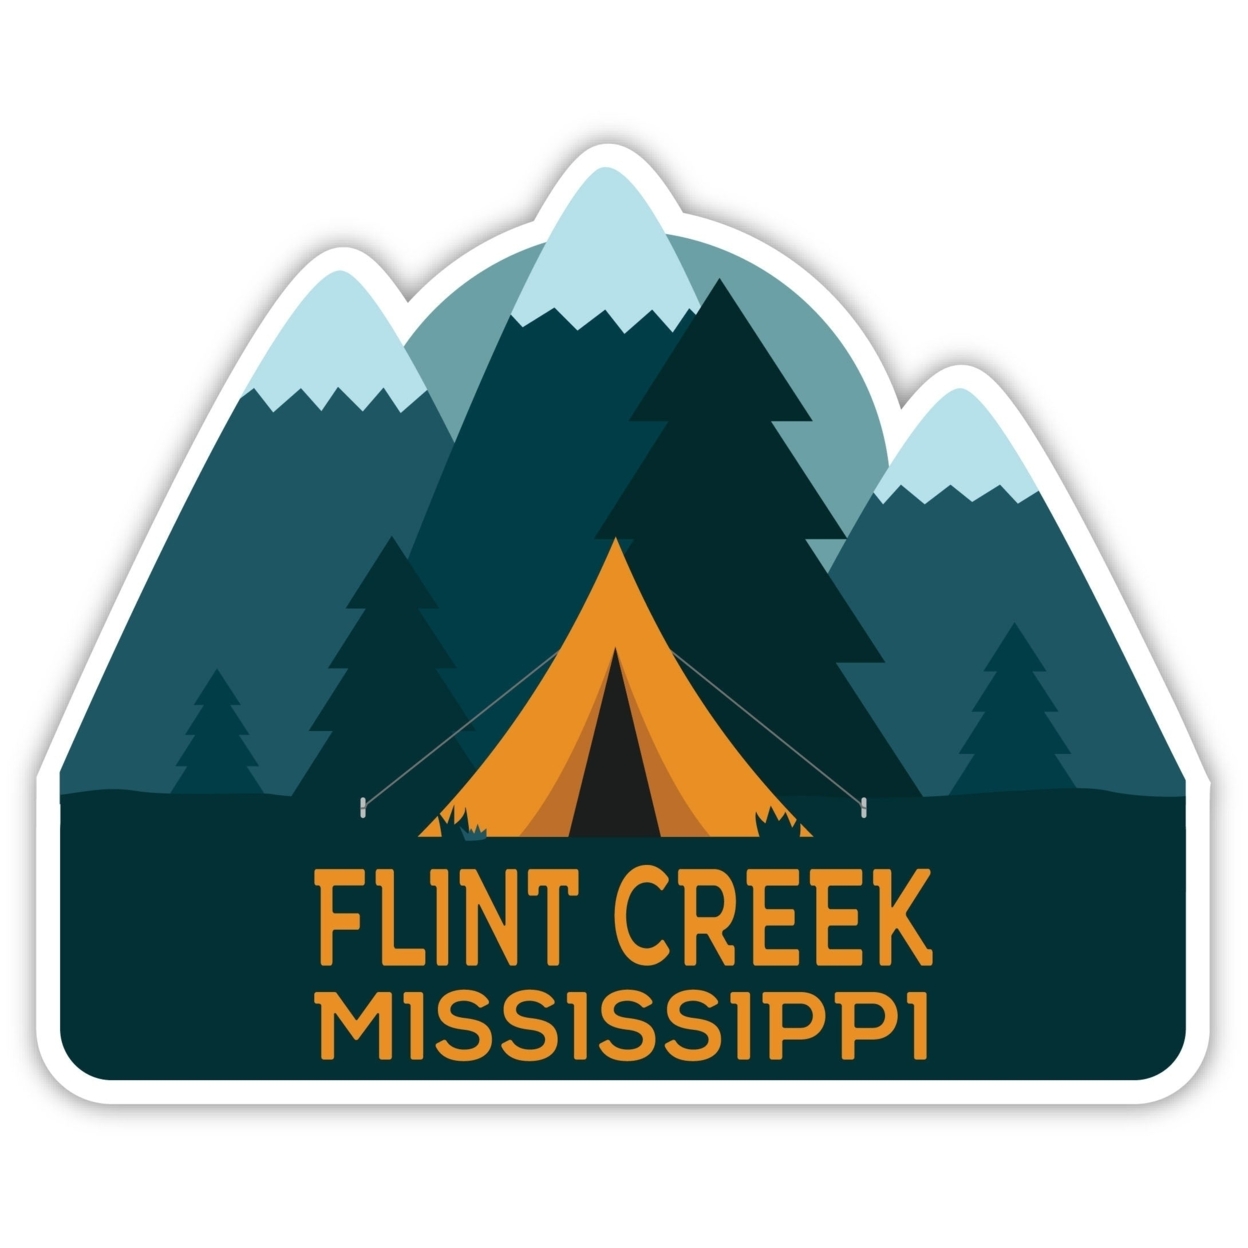 Flint Creek Mississippi Souvenir Decorative Stickers (Choose Theme And Size) - 4-Pack, 6-Inch, Tent